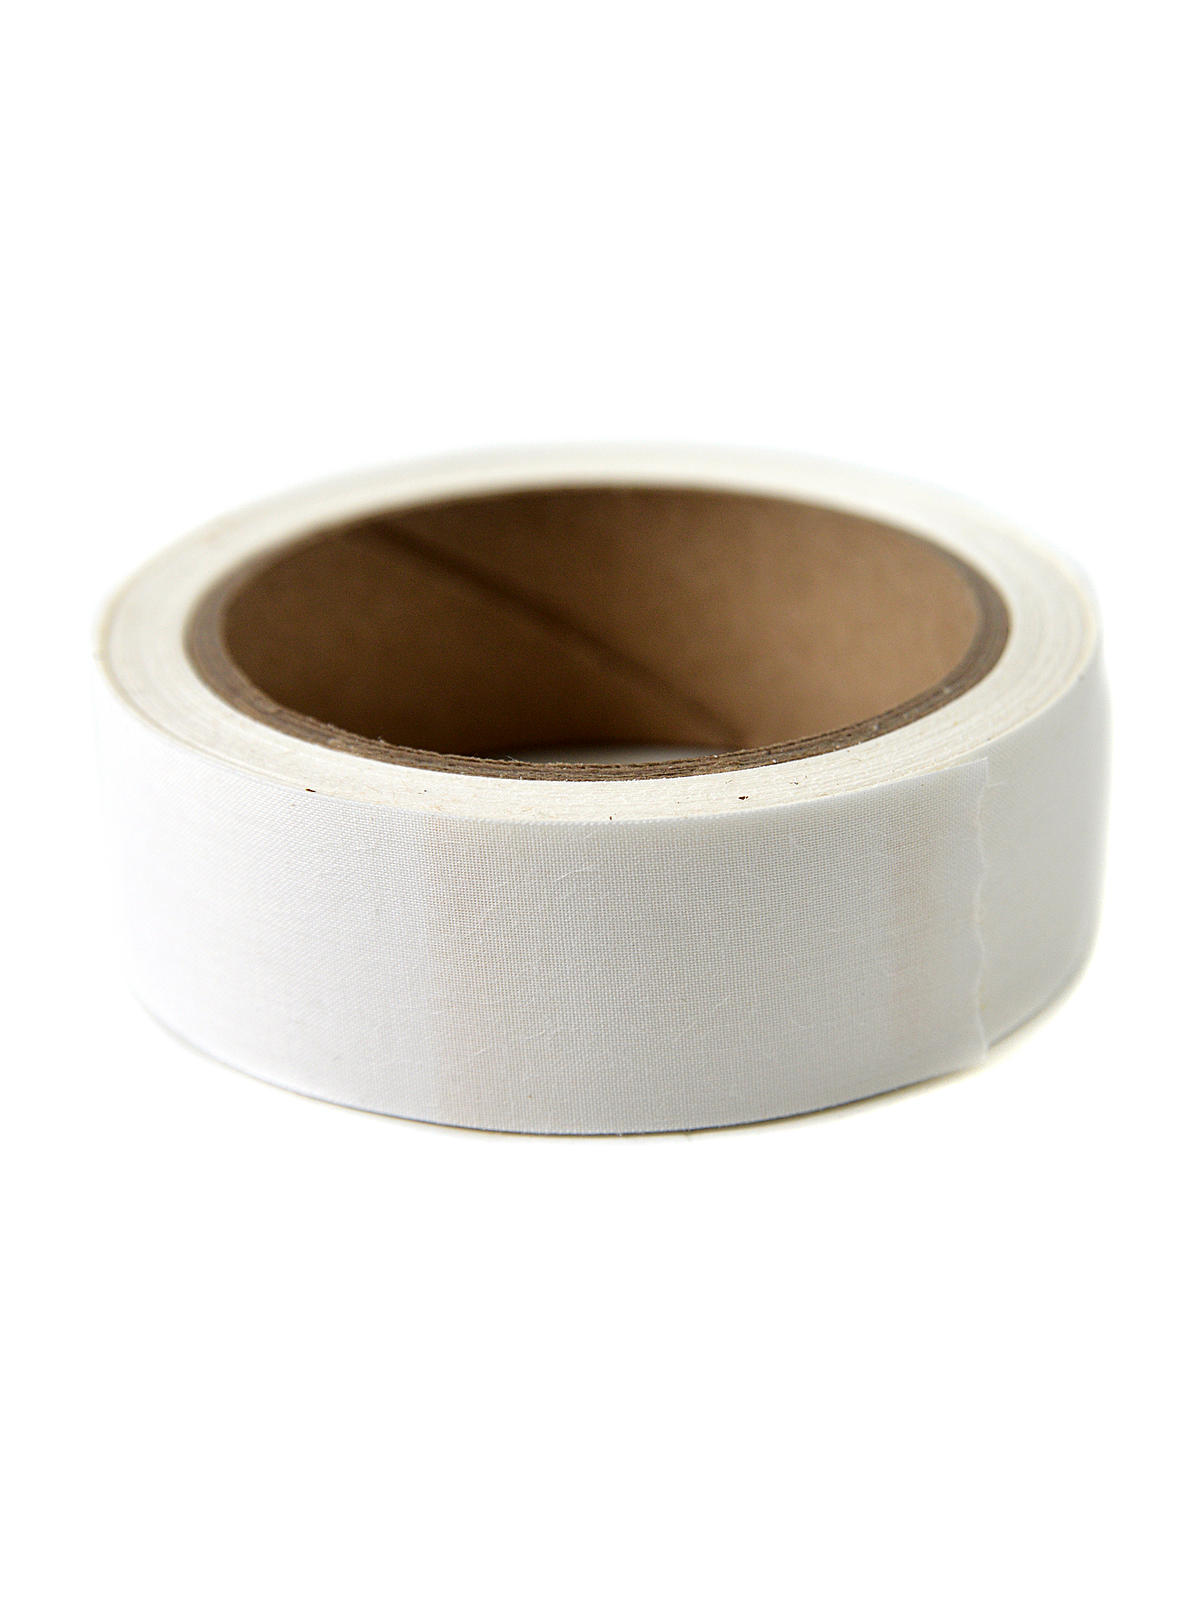 Self Adhesive Linen Hinging Tape 1 1 4 In. X 35 Ft.